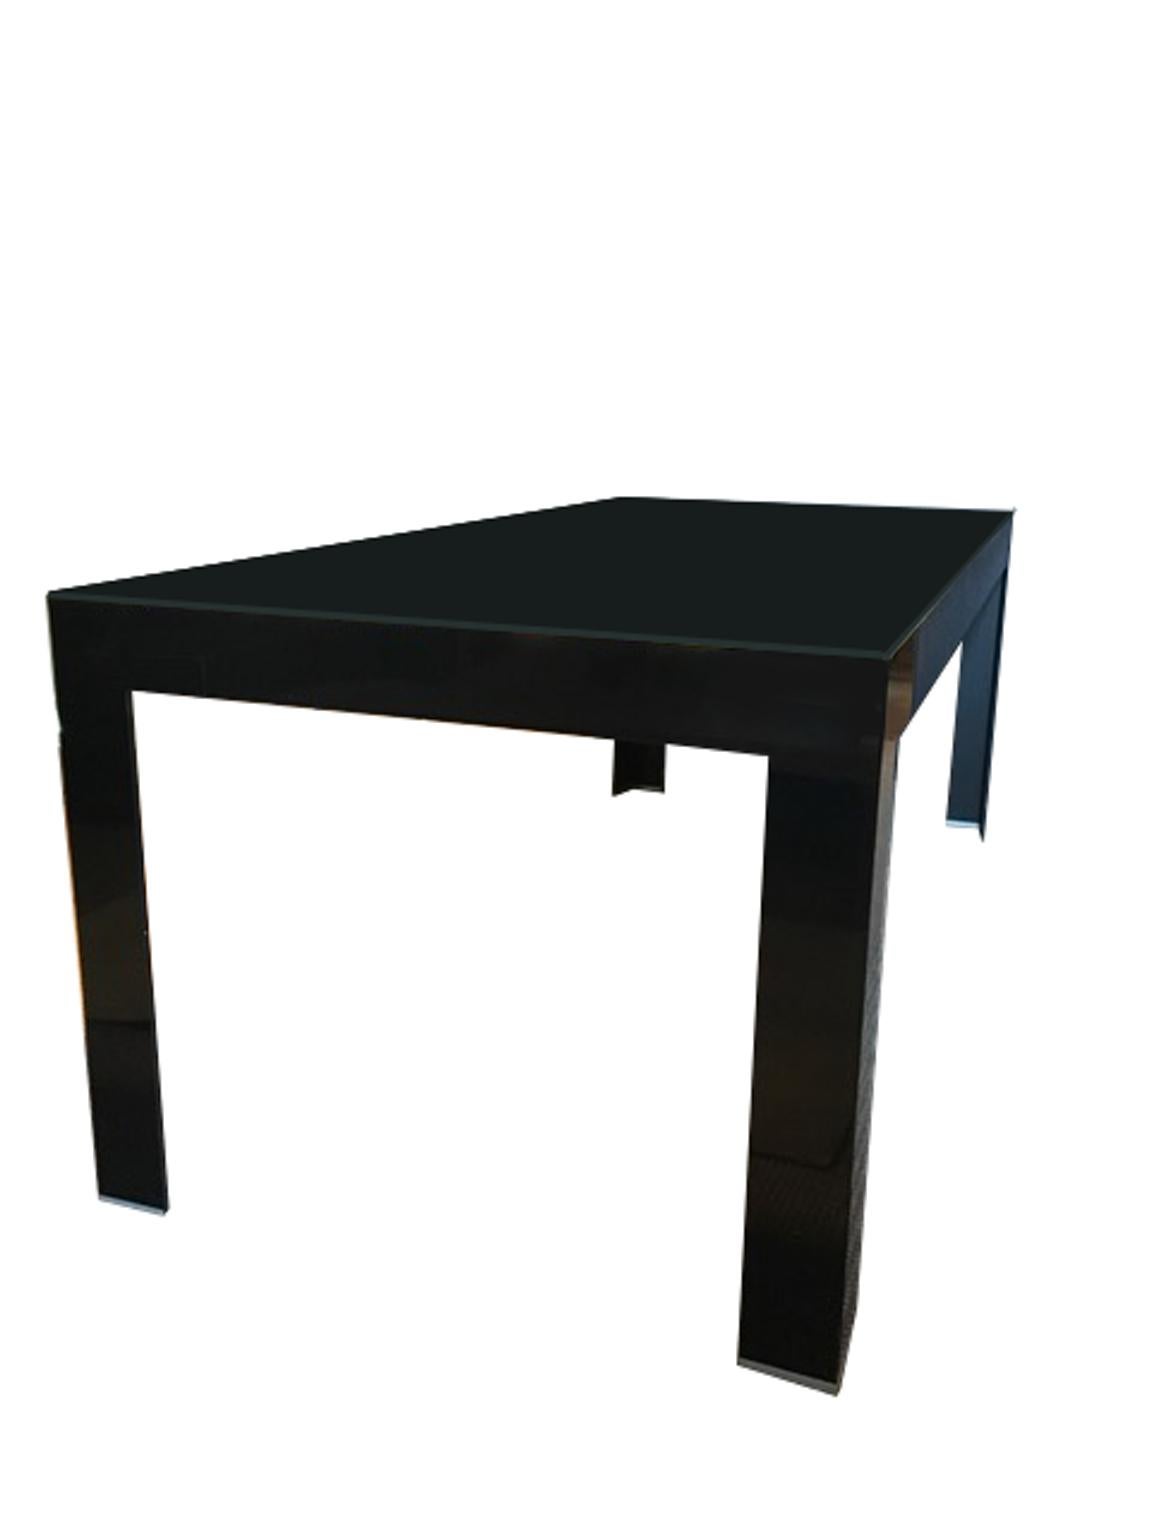 Italian Design Black Glass Dining Table in Minimal Style Contemporary Production For Sale 7